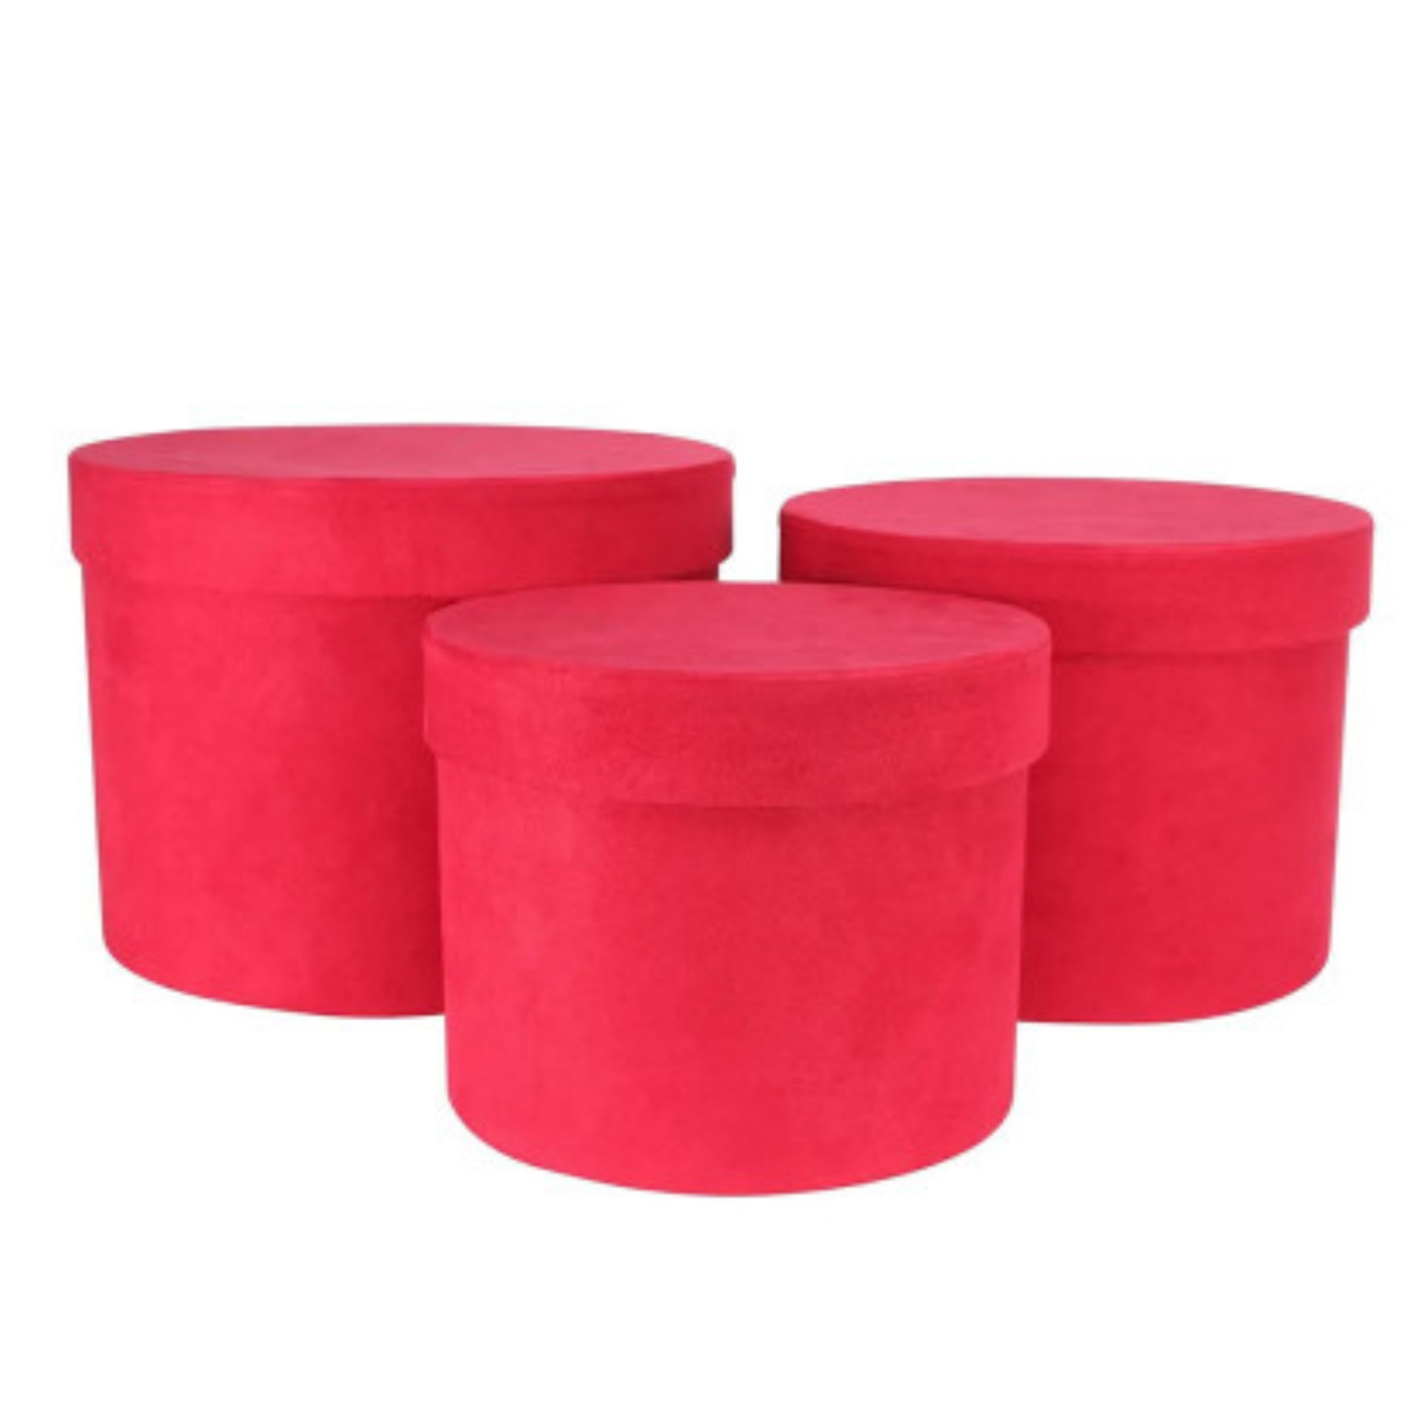 A stack of round red velvet gift boxes.